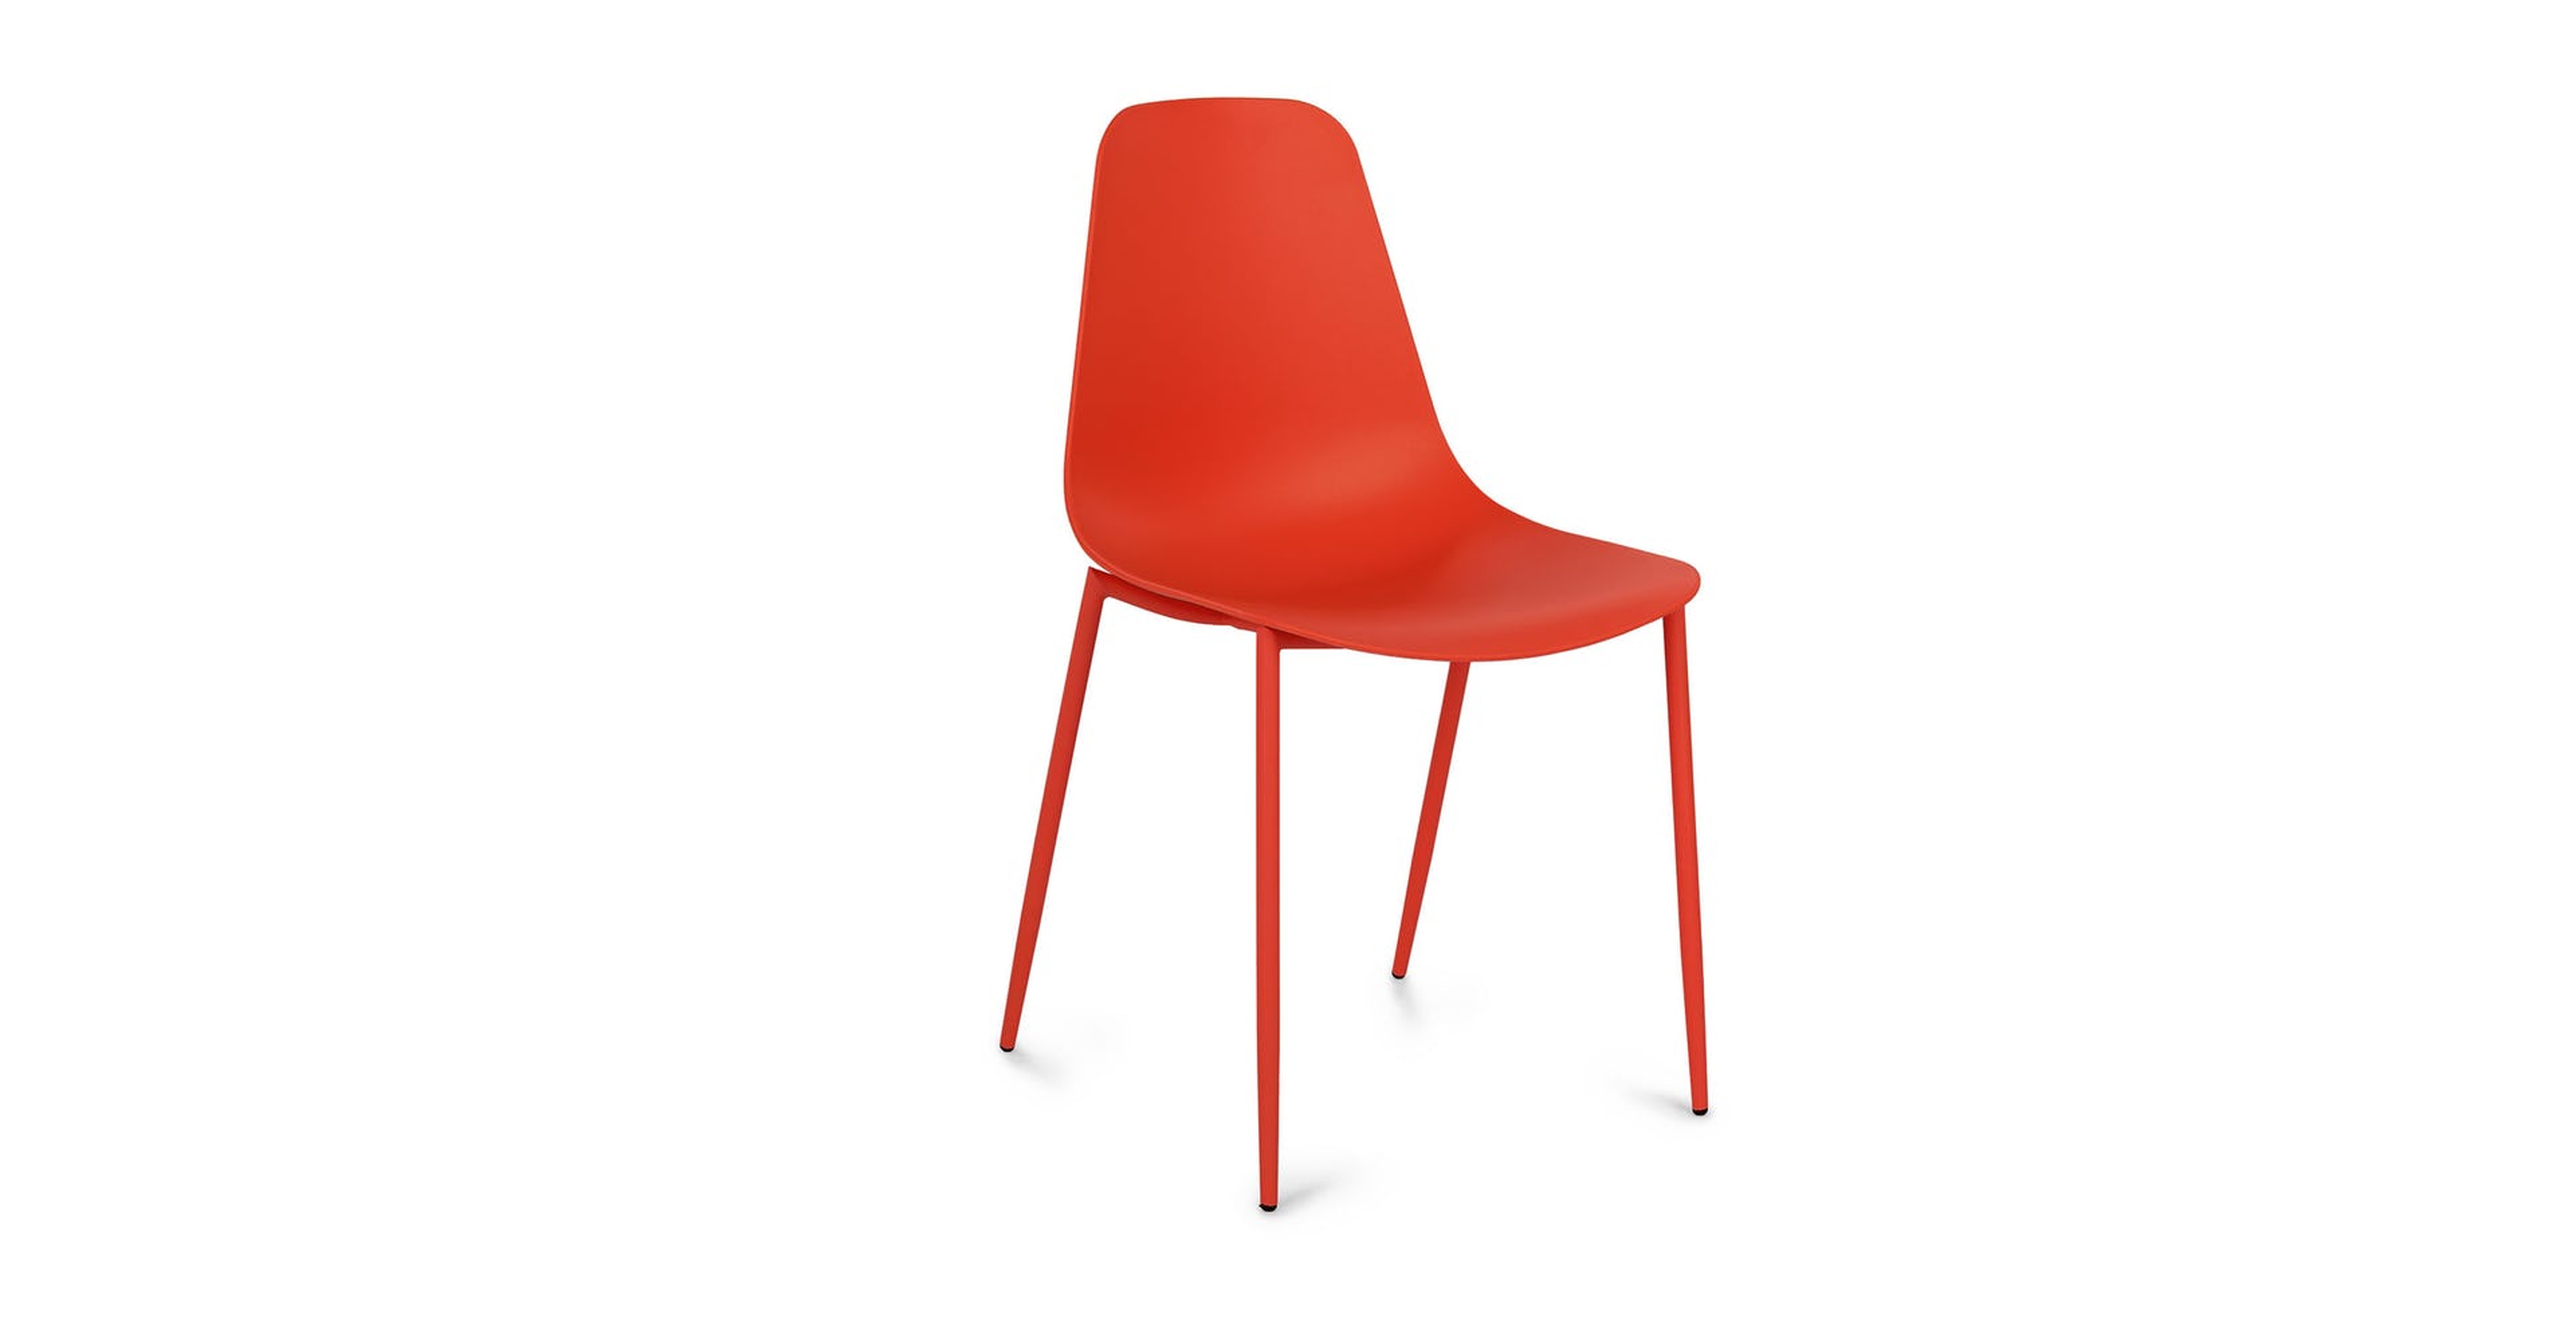 Svelti dining chair -  Poppy Red. Set of 2 - Article